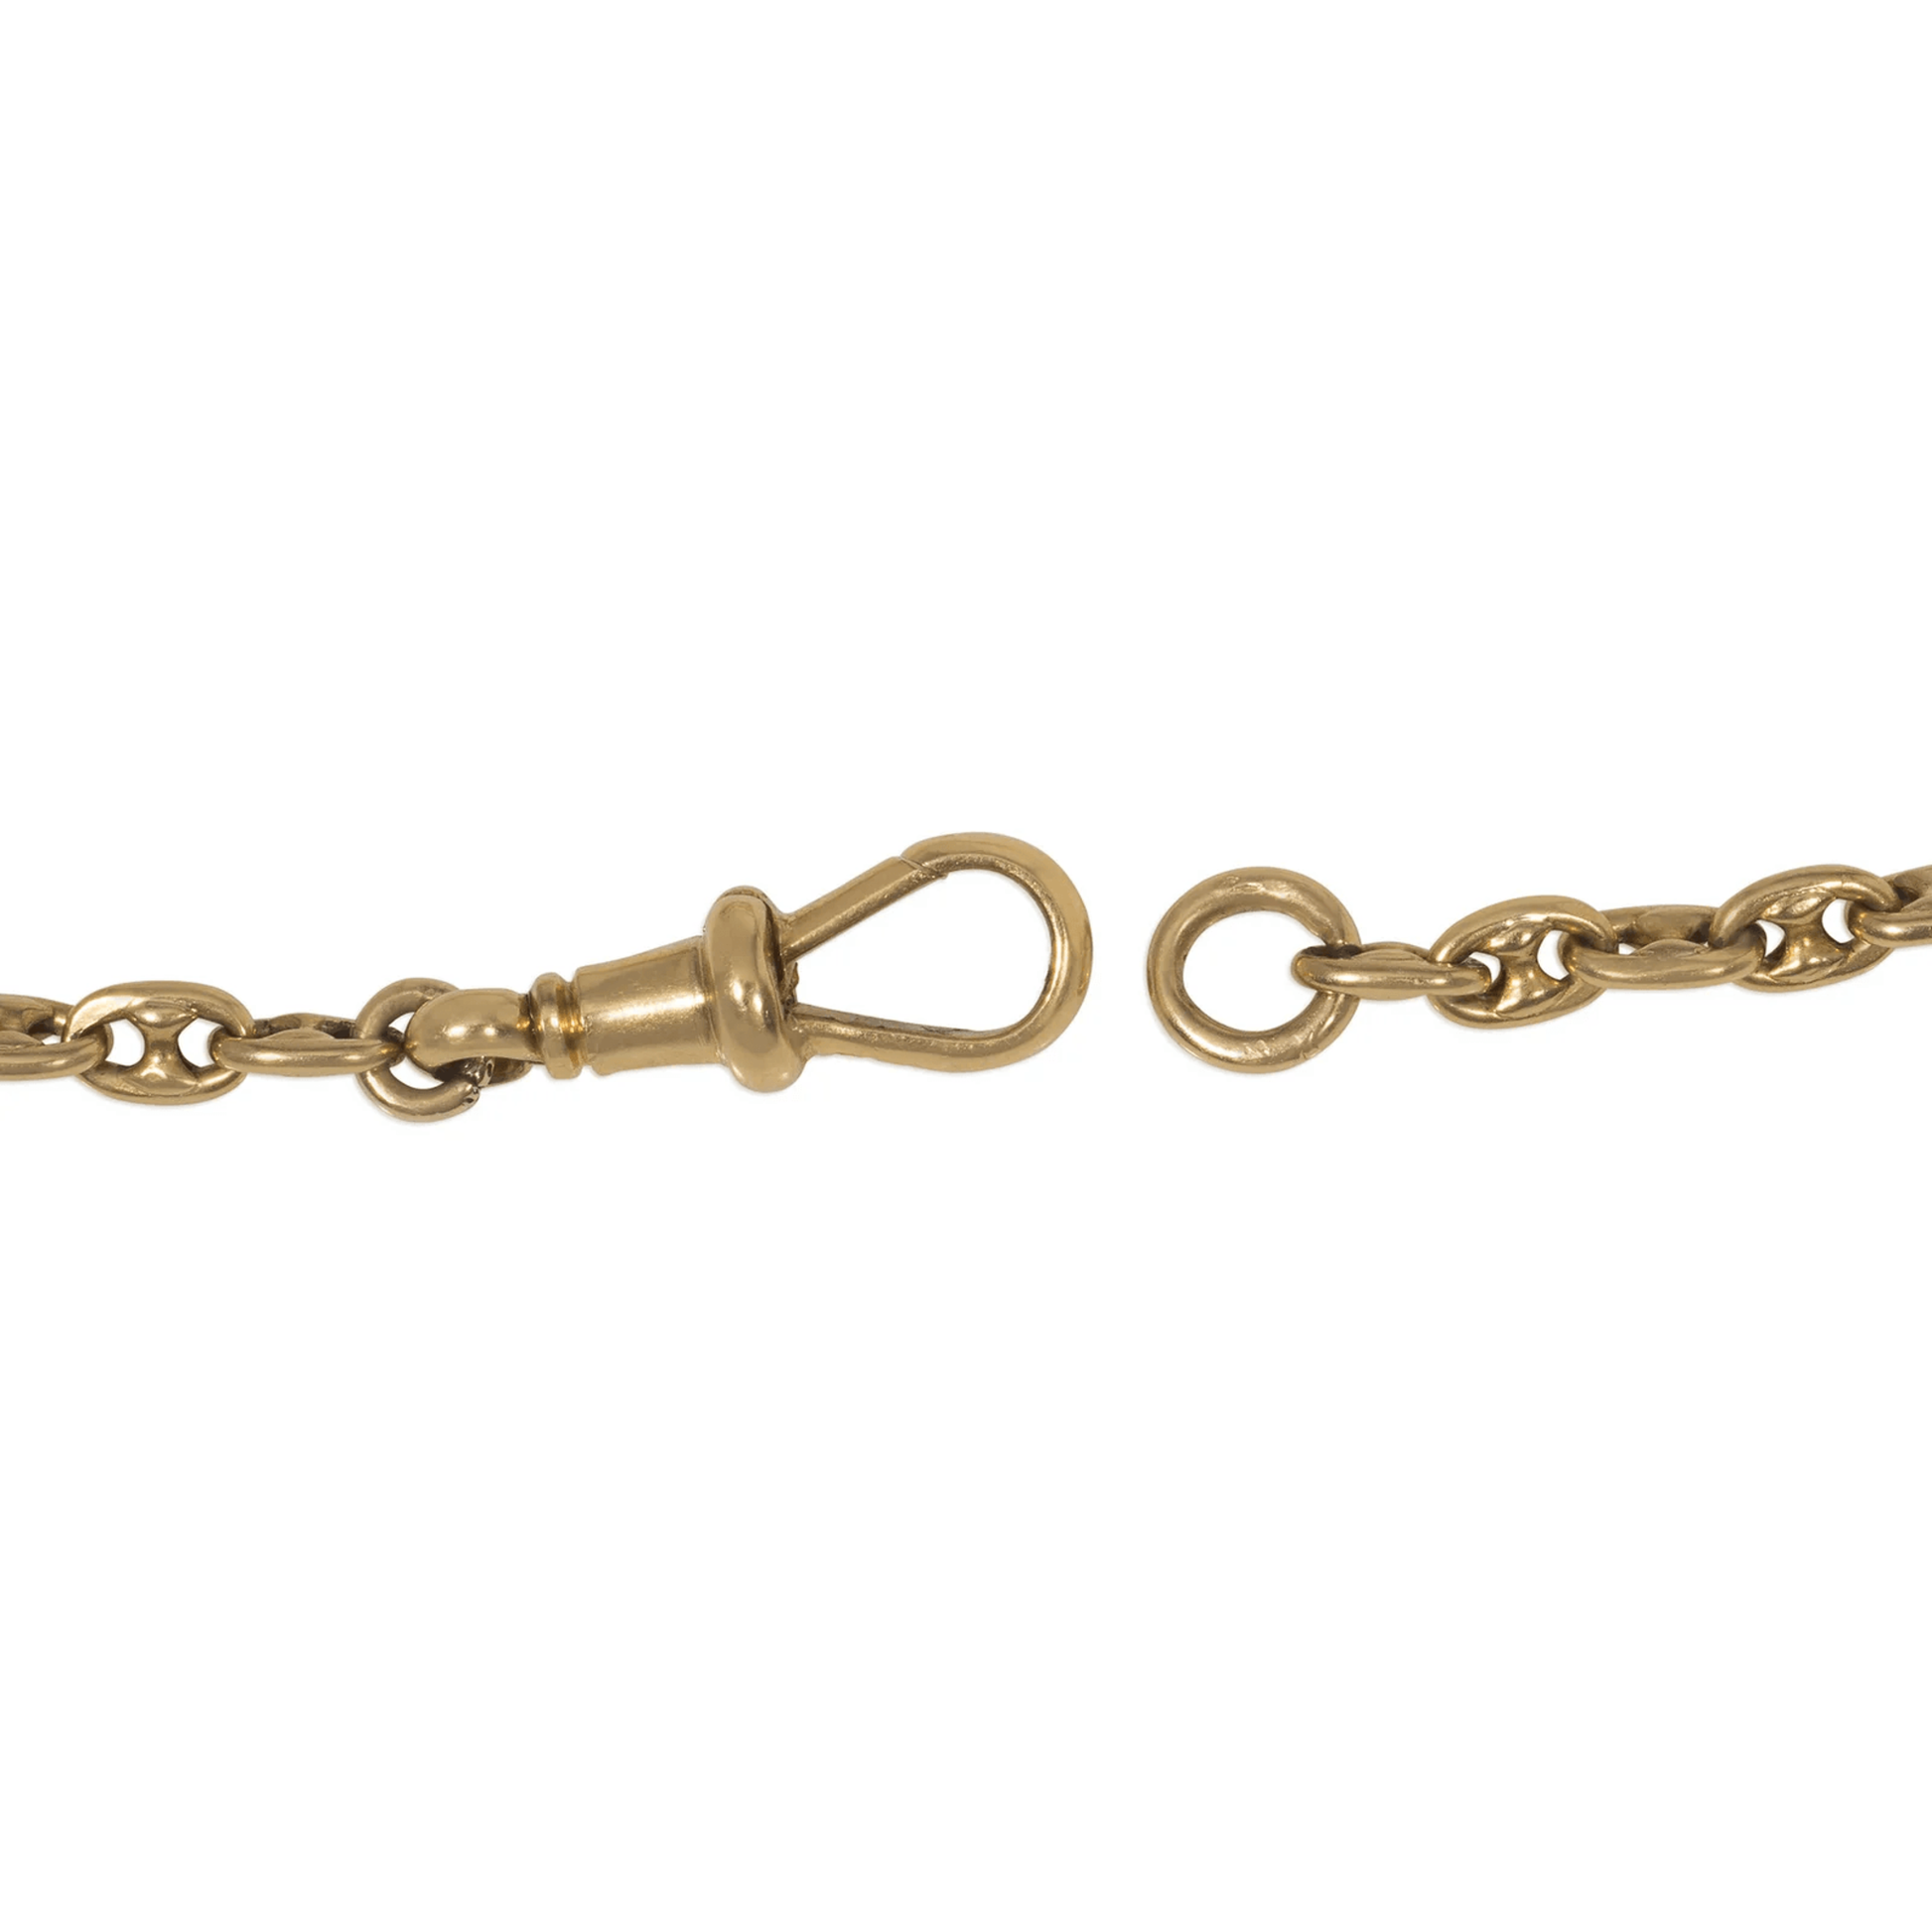 Victorian 18KT Yellow Gold Necklace close-up of clasp